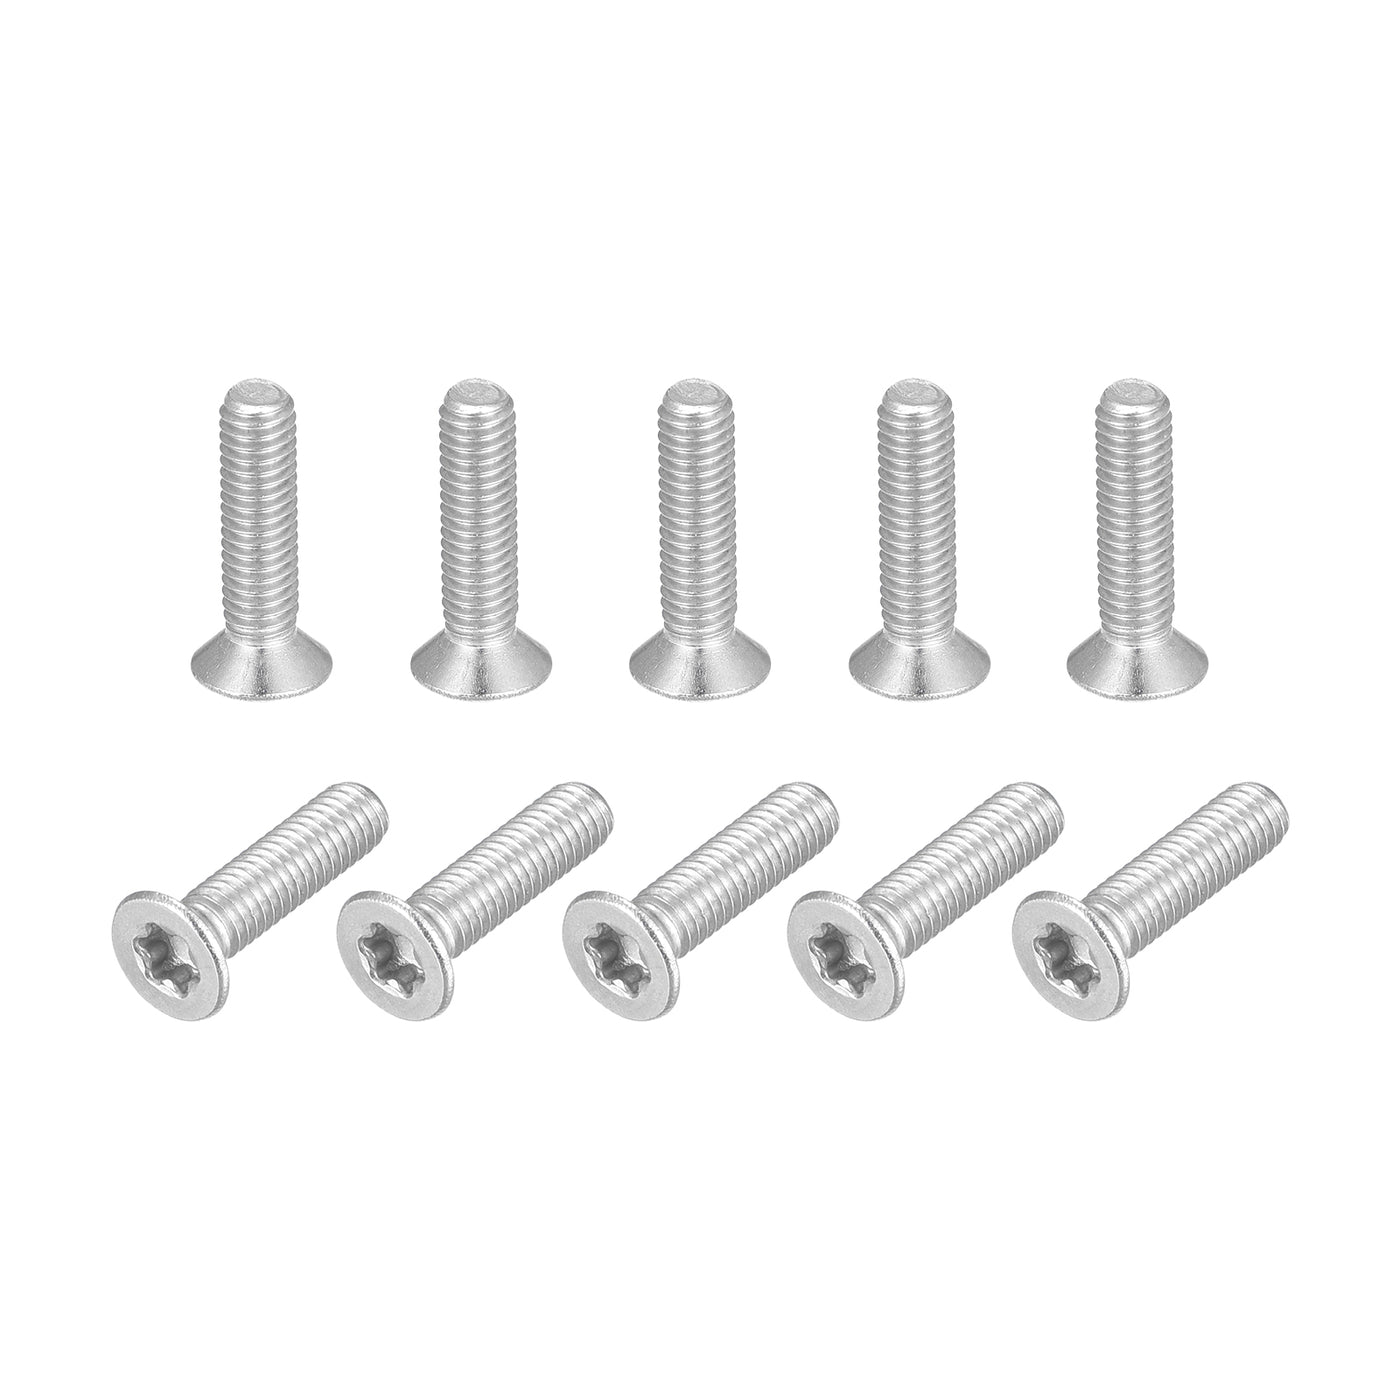 uxcell Uxcell M3x12mm Torx Security Screws, 10pcs 316 Stainless Steel Countersunk Head Screw